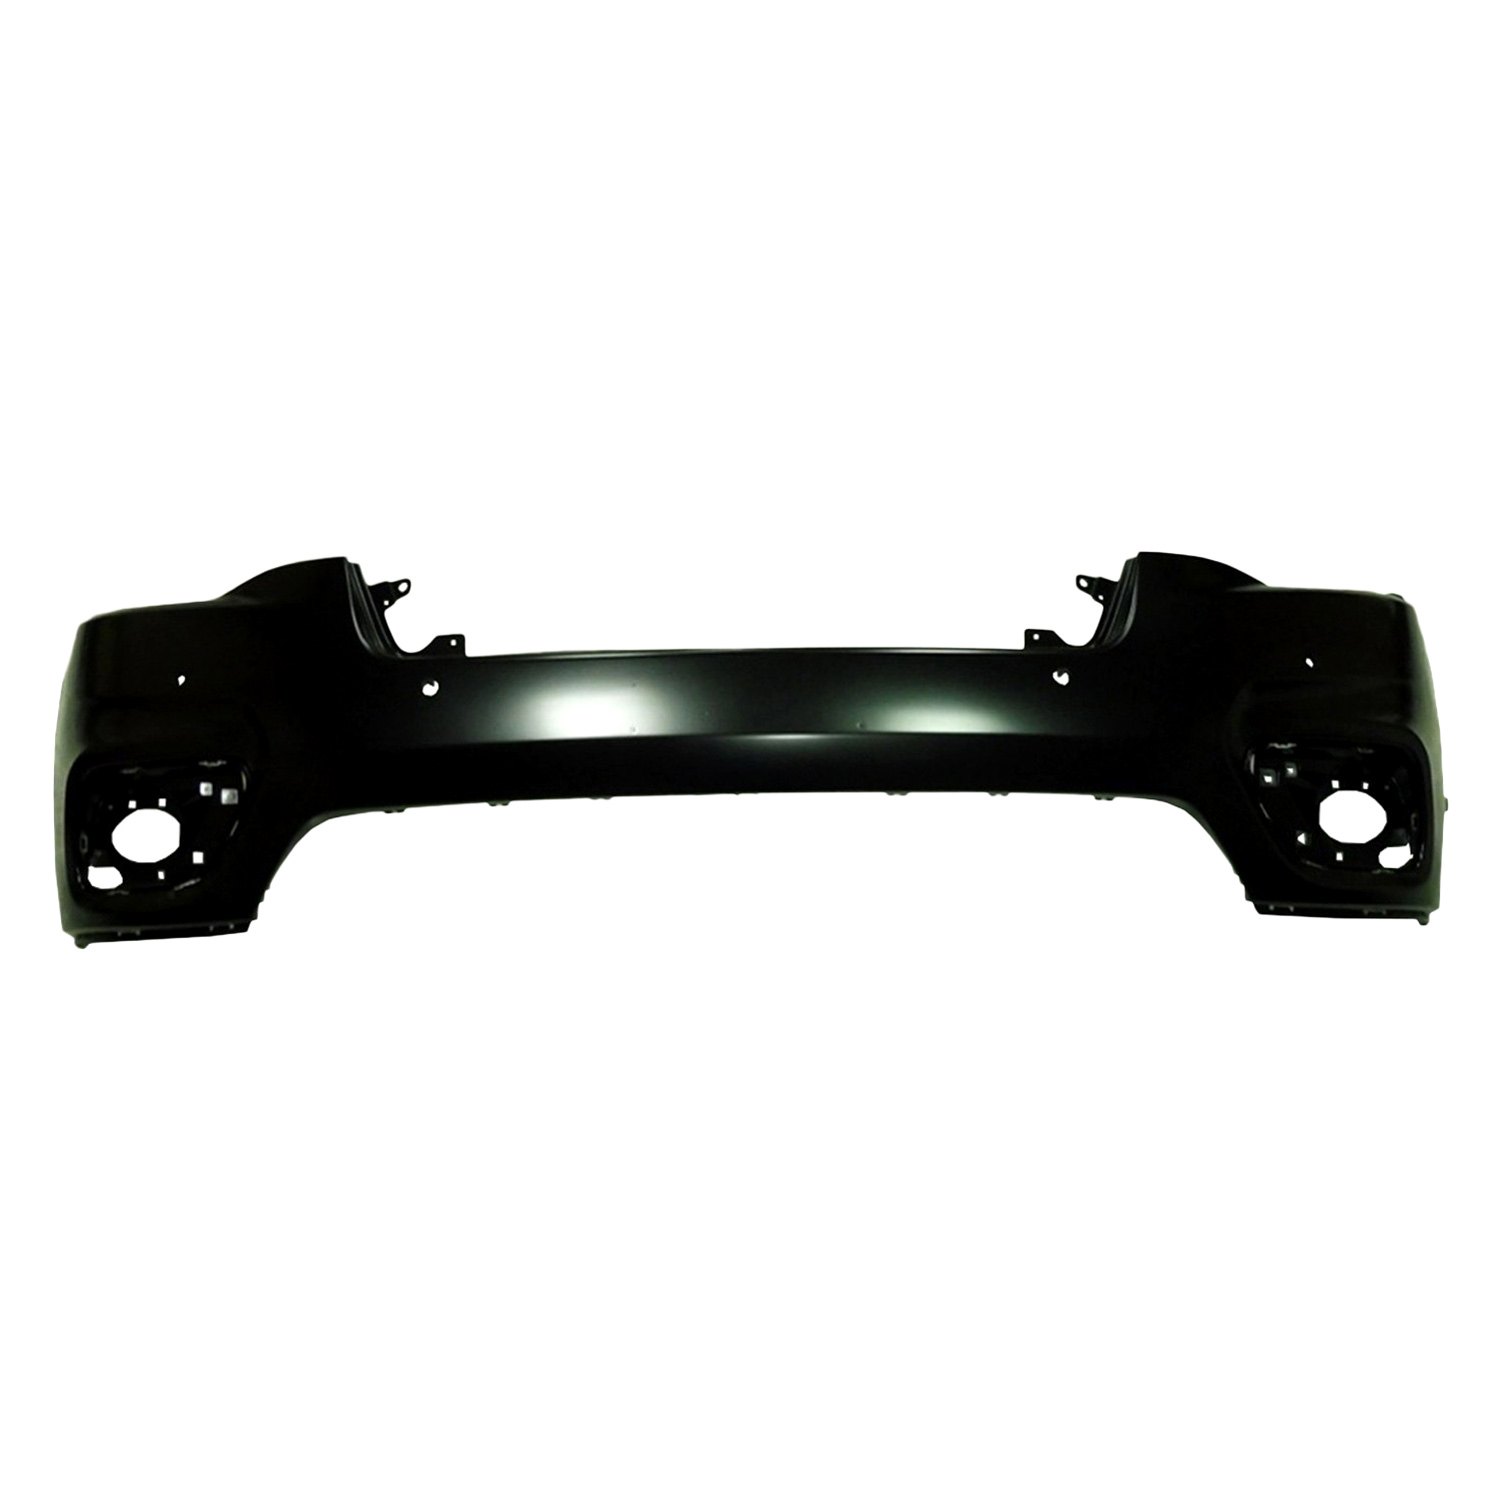 Replace® Ch1014134 Front Upper Bumper Cover Standard Line 8936